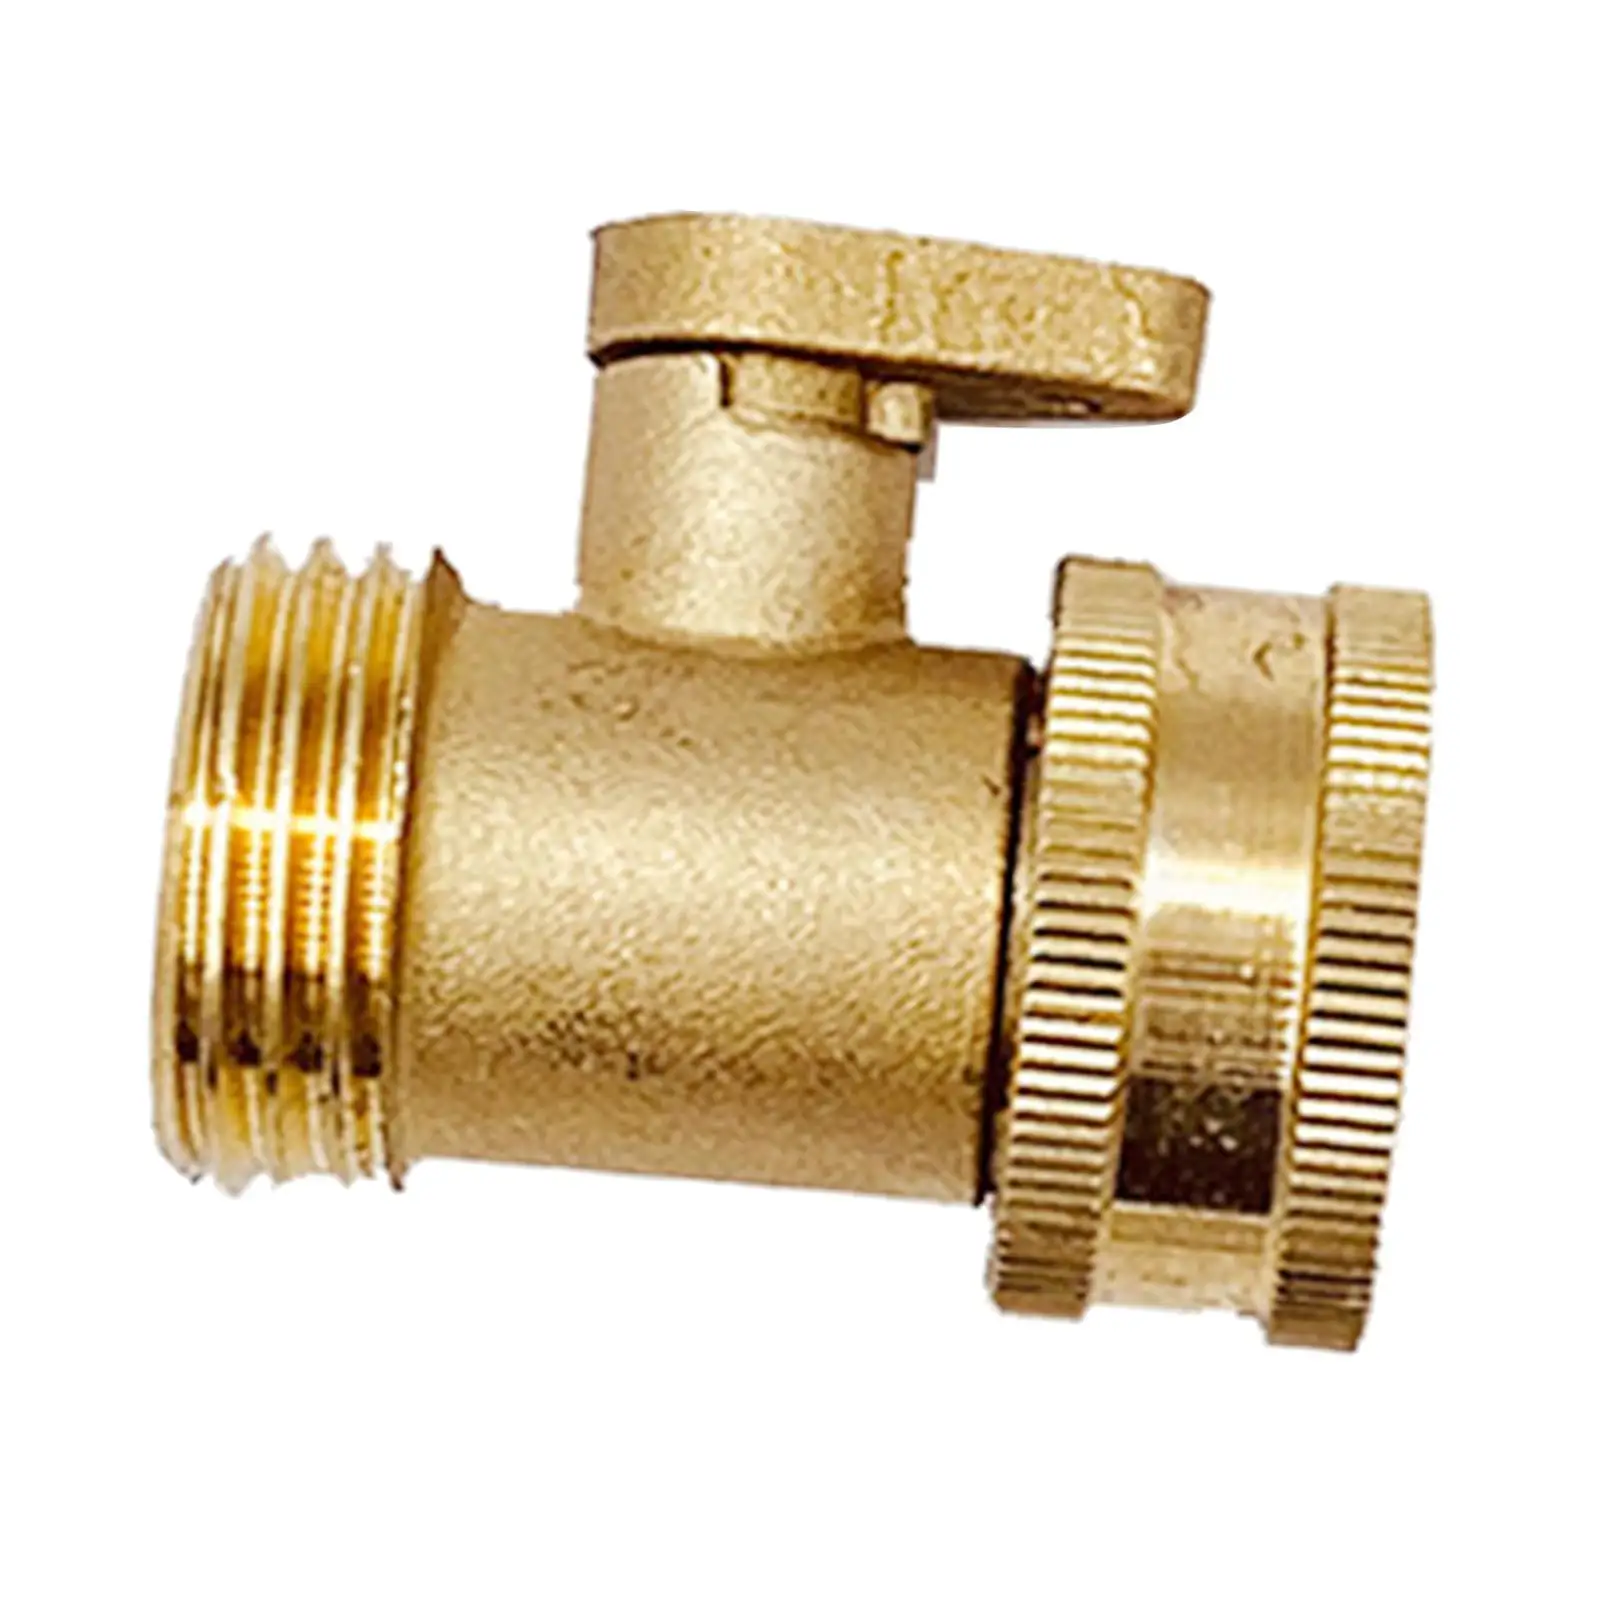 Brass Garden Hose Adapter Watering Connector Connection Tube Fittings Replacements Gardening Accessories for Outdoor Garden Lawn